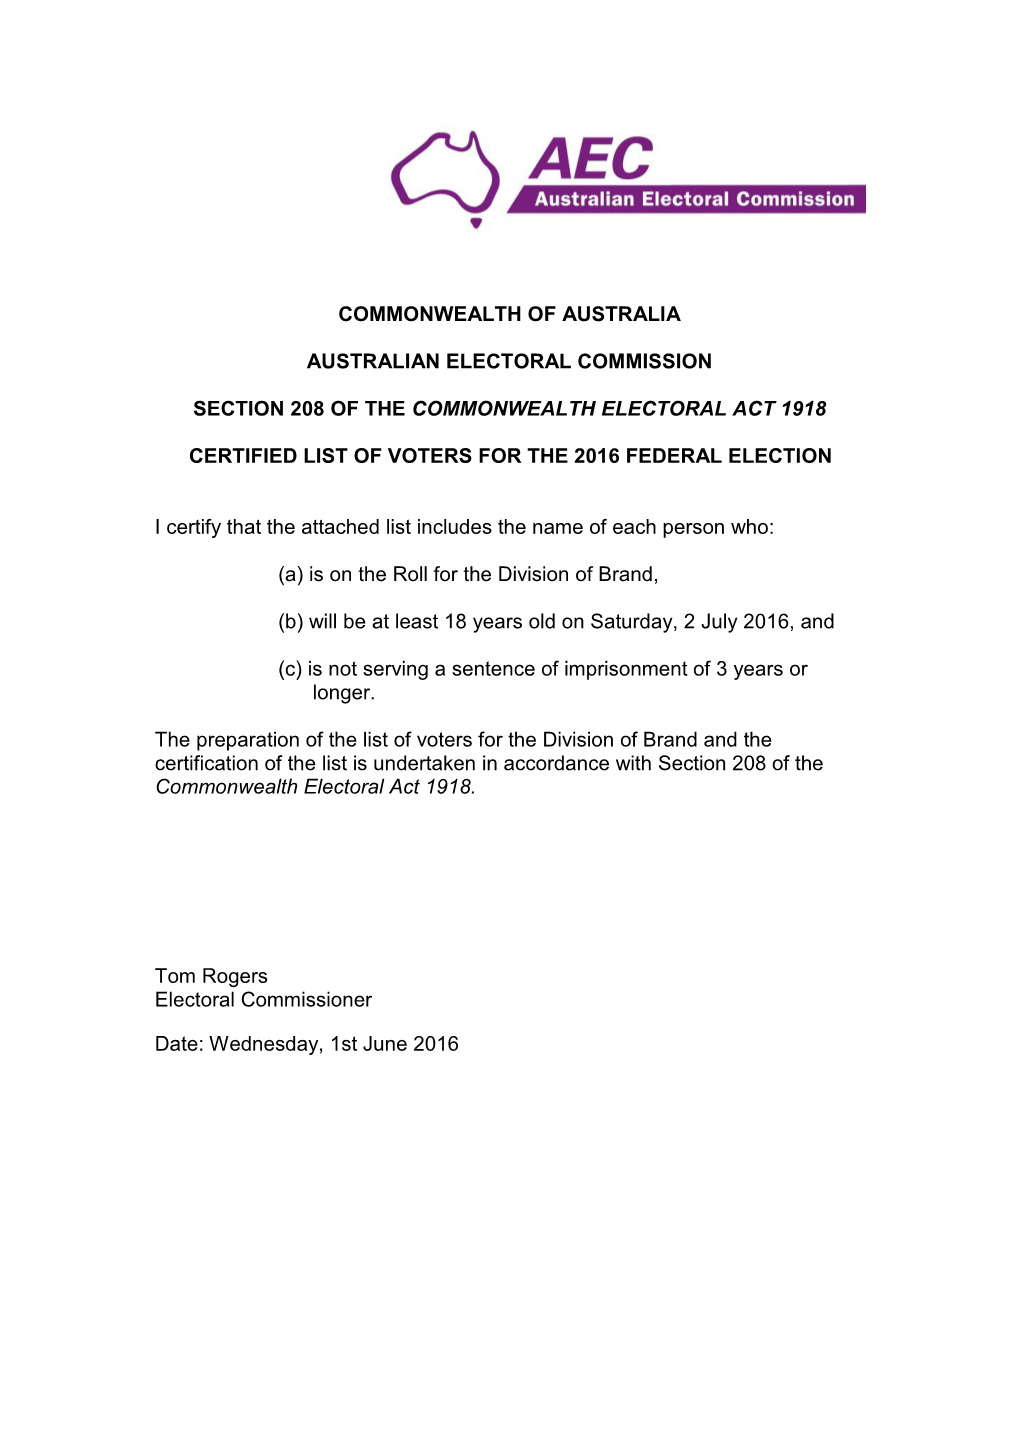 Certification of Certified List of Voters for the 2016 Federal Election